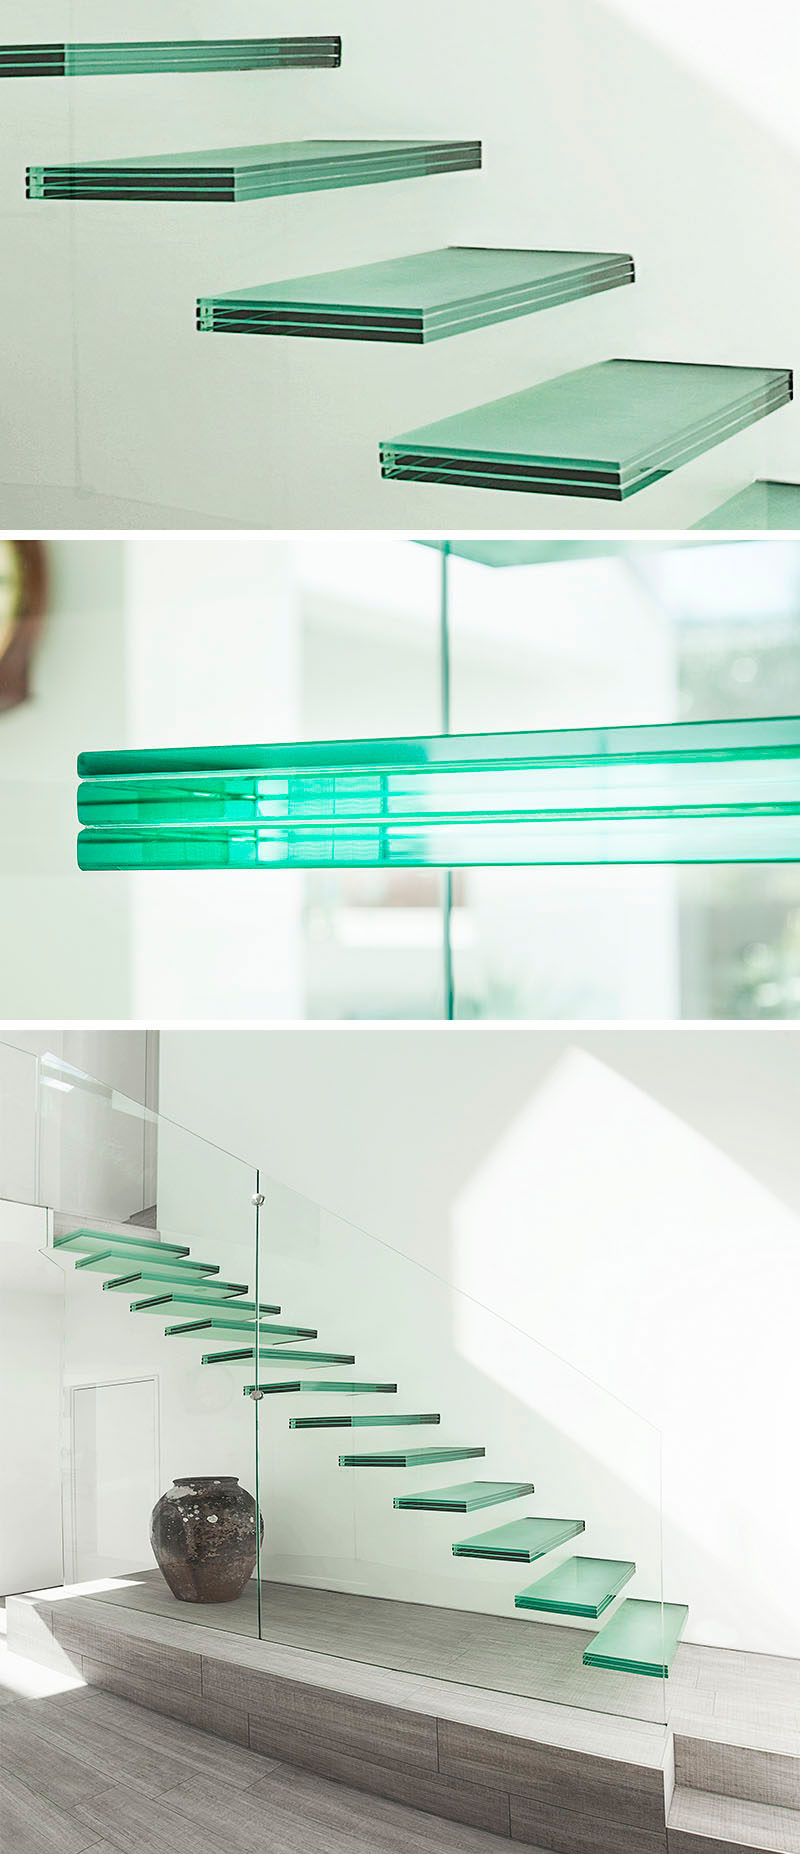 18 Examples Of Stair Details To Inspire You // Each tread on these stairs is made up of three layers of a blue/green glass.